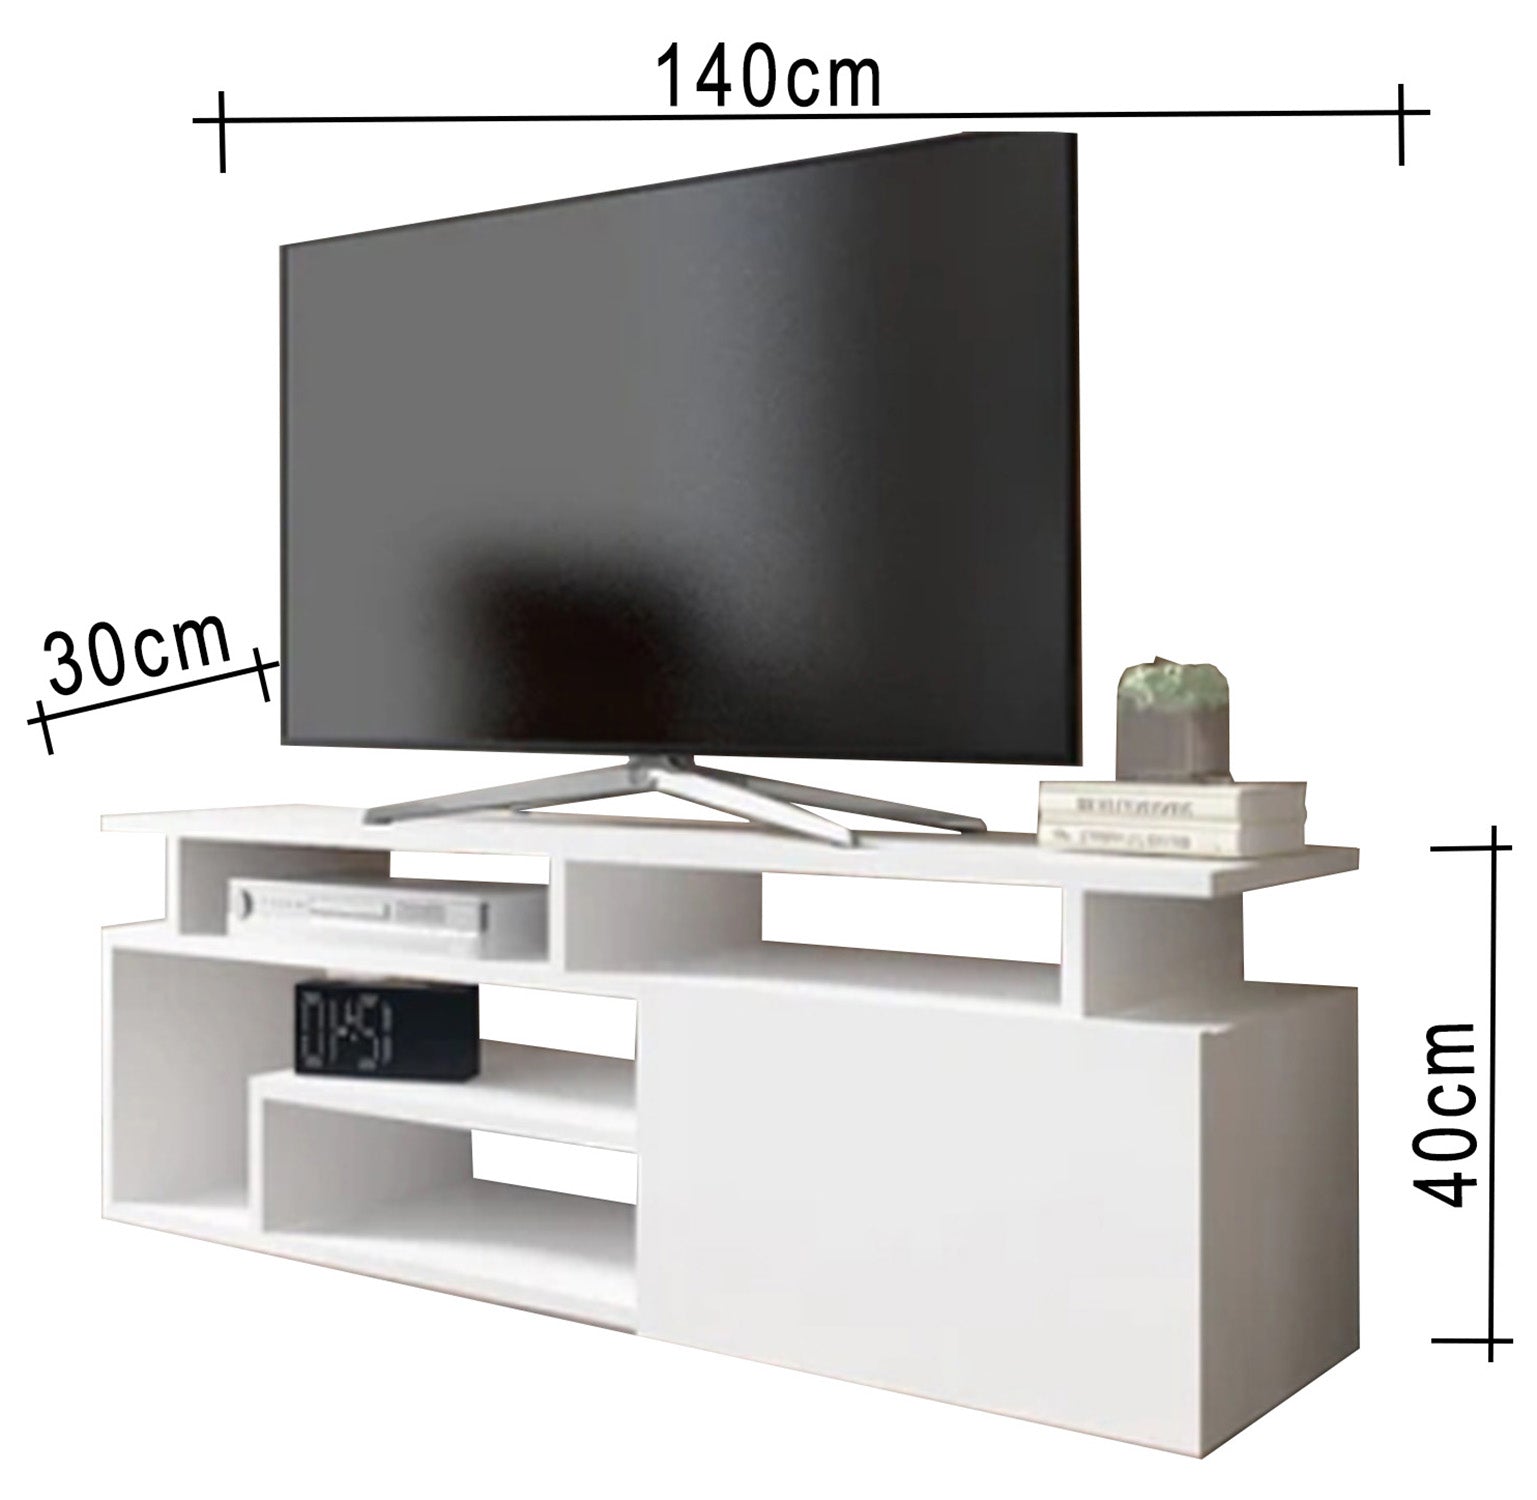 TV table with Overlapping shelves